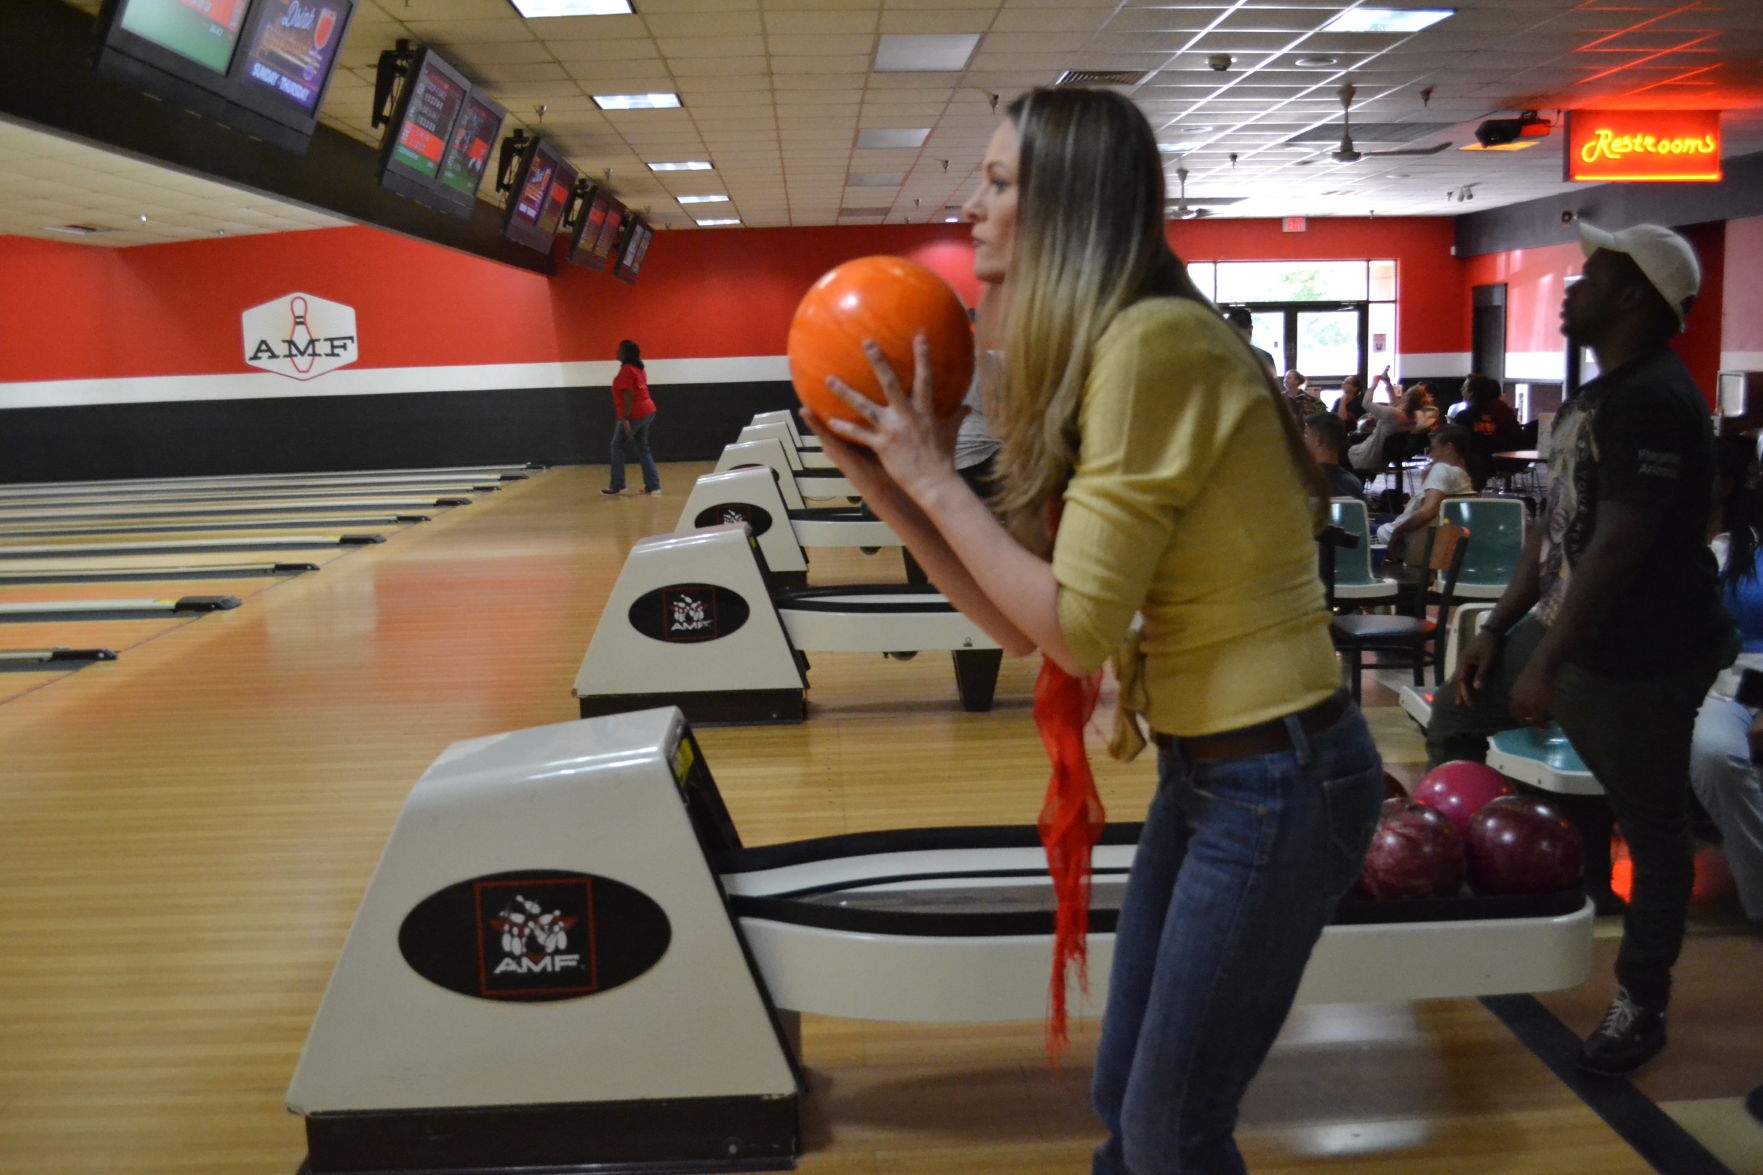 Bowling rolls to more popularity in 